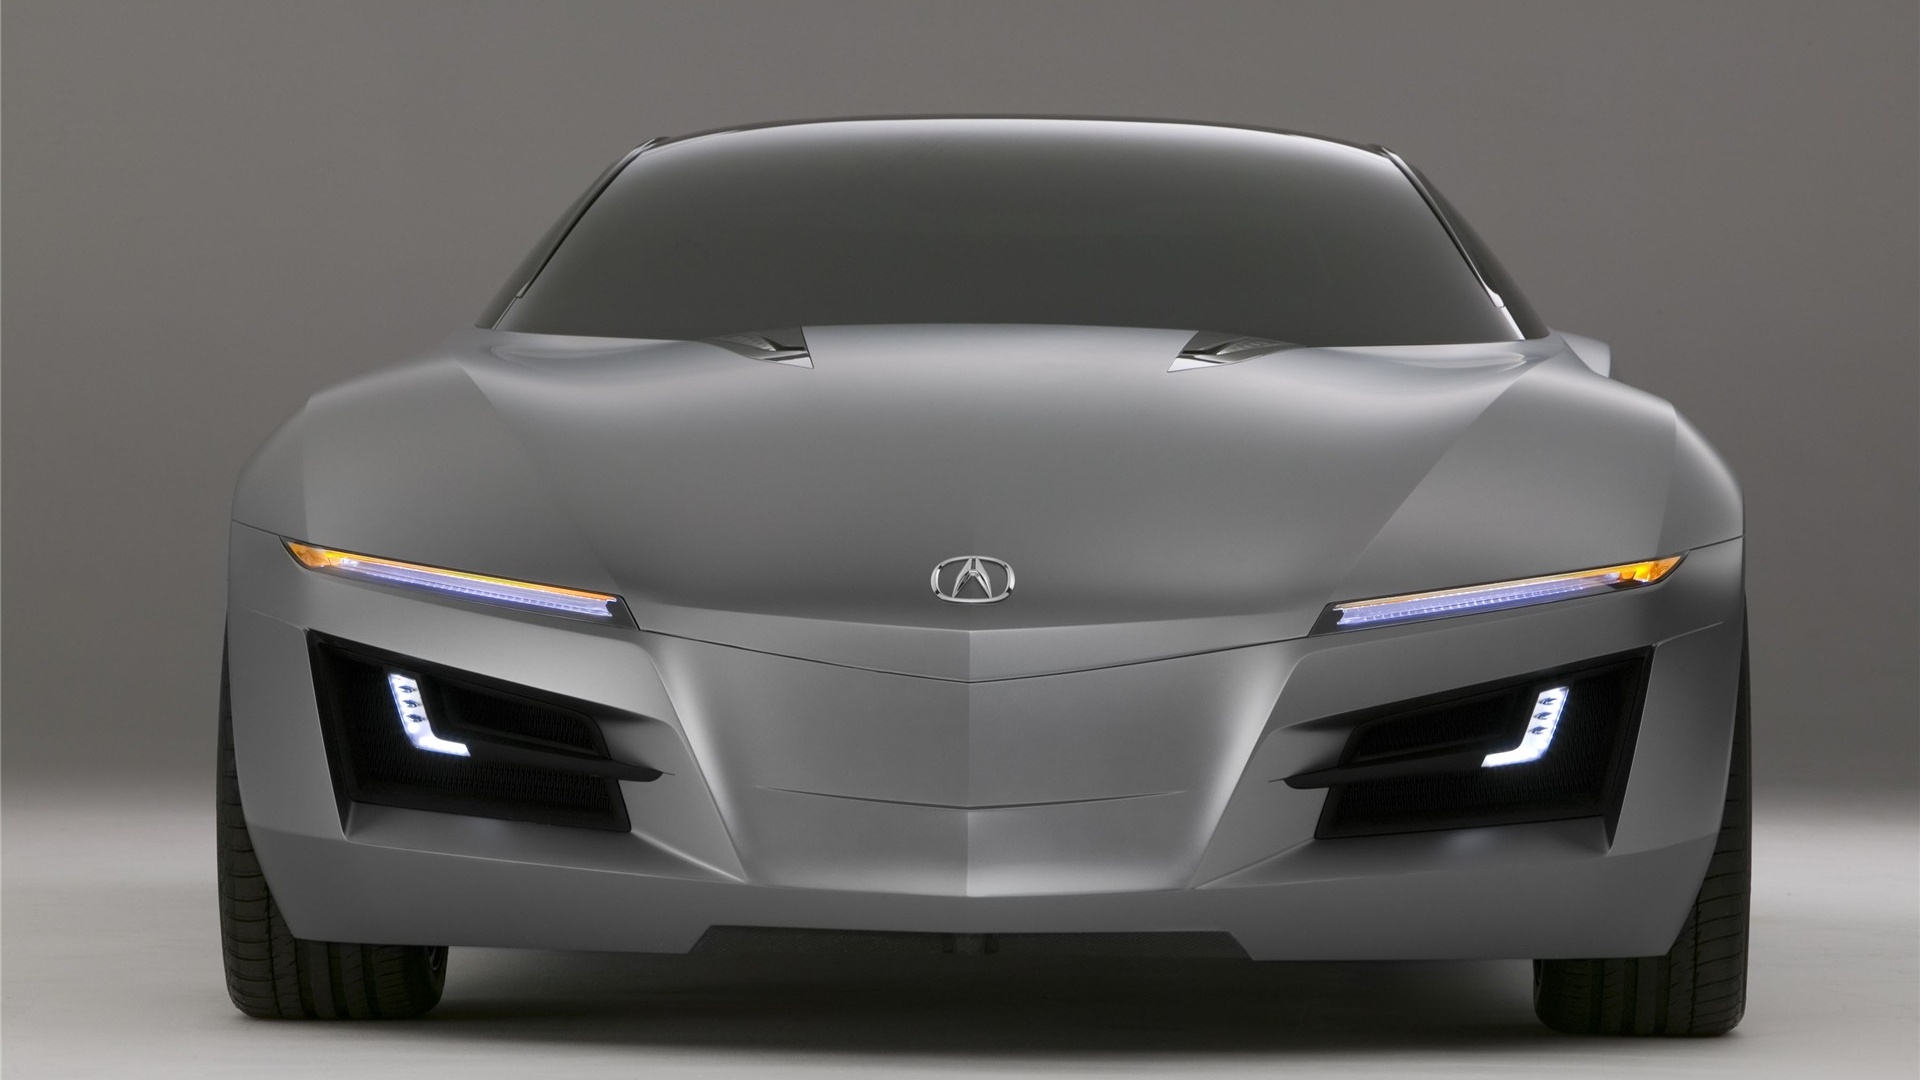 A sleek concept vehicle: Acura Advanced Sedan Concept. Perfect for car enthusiasts and lovers of modern design.